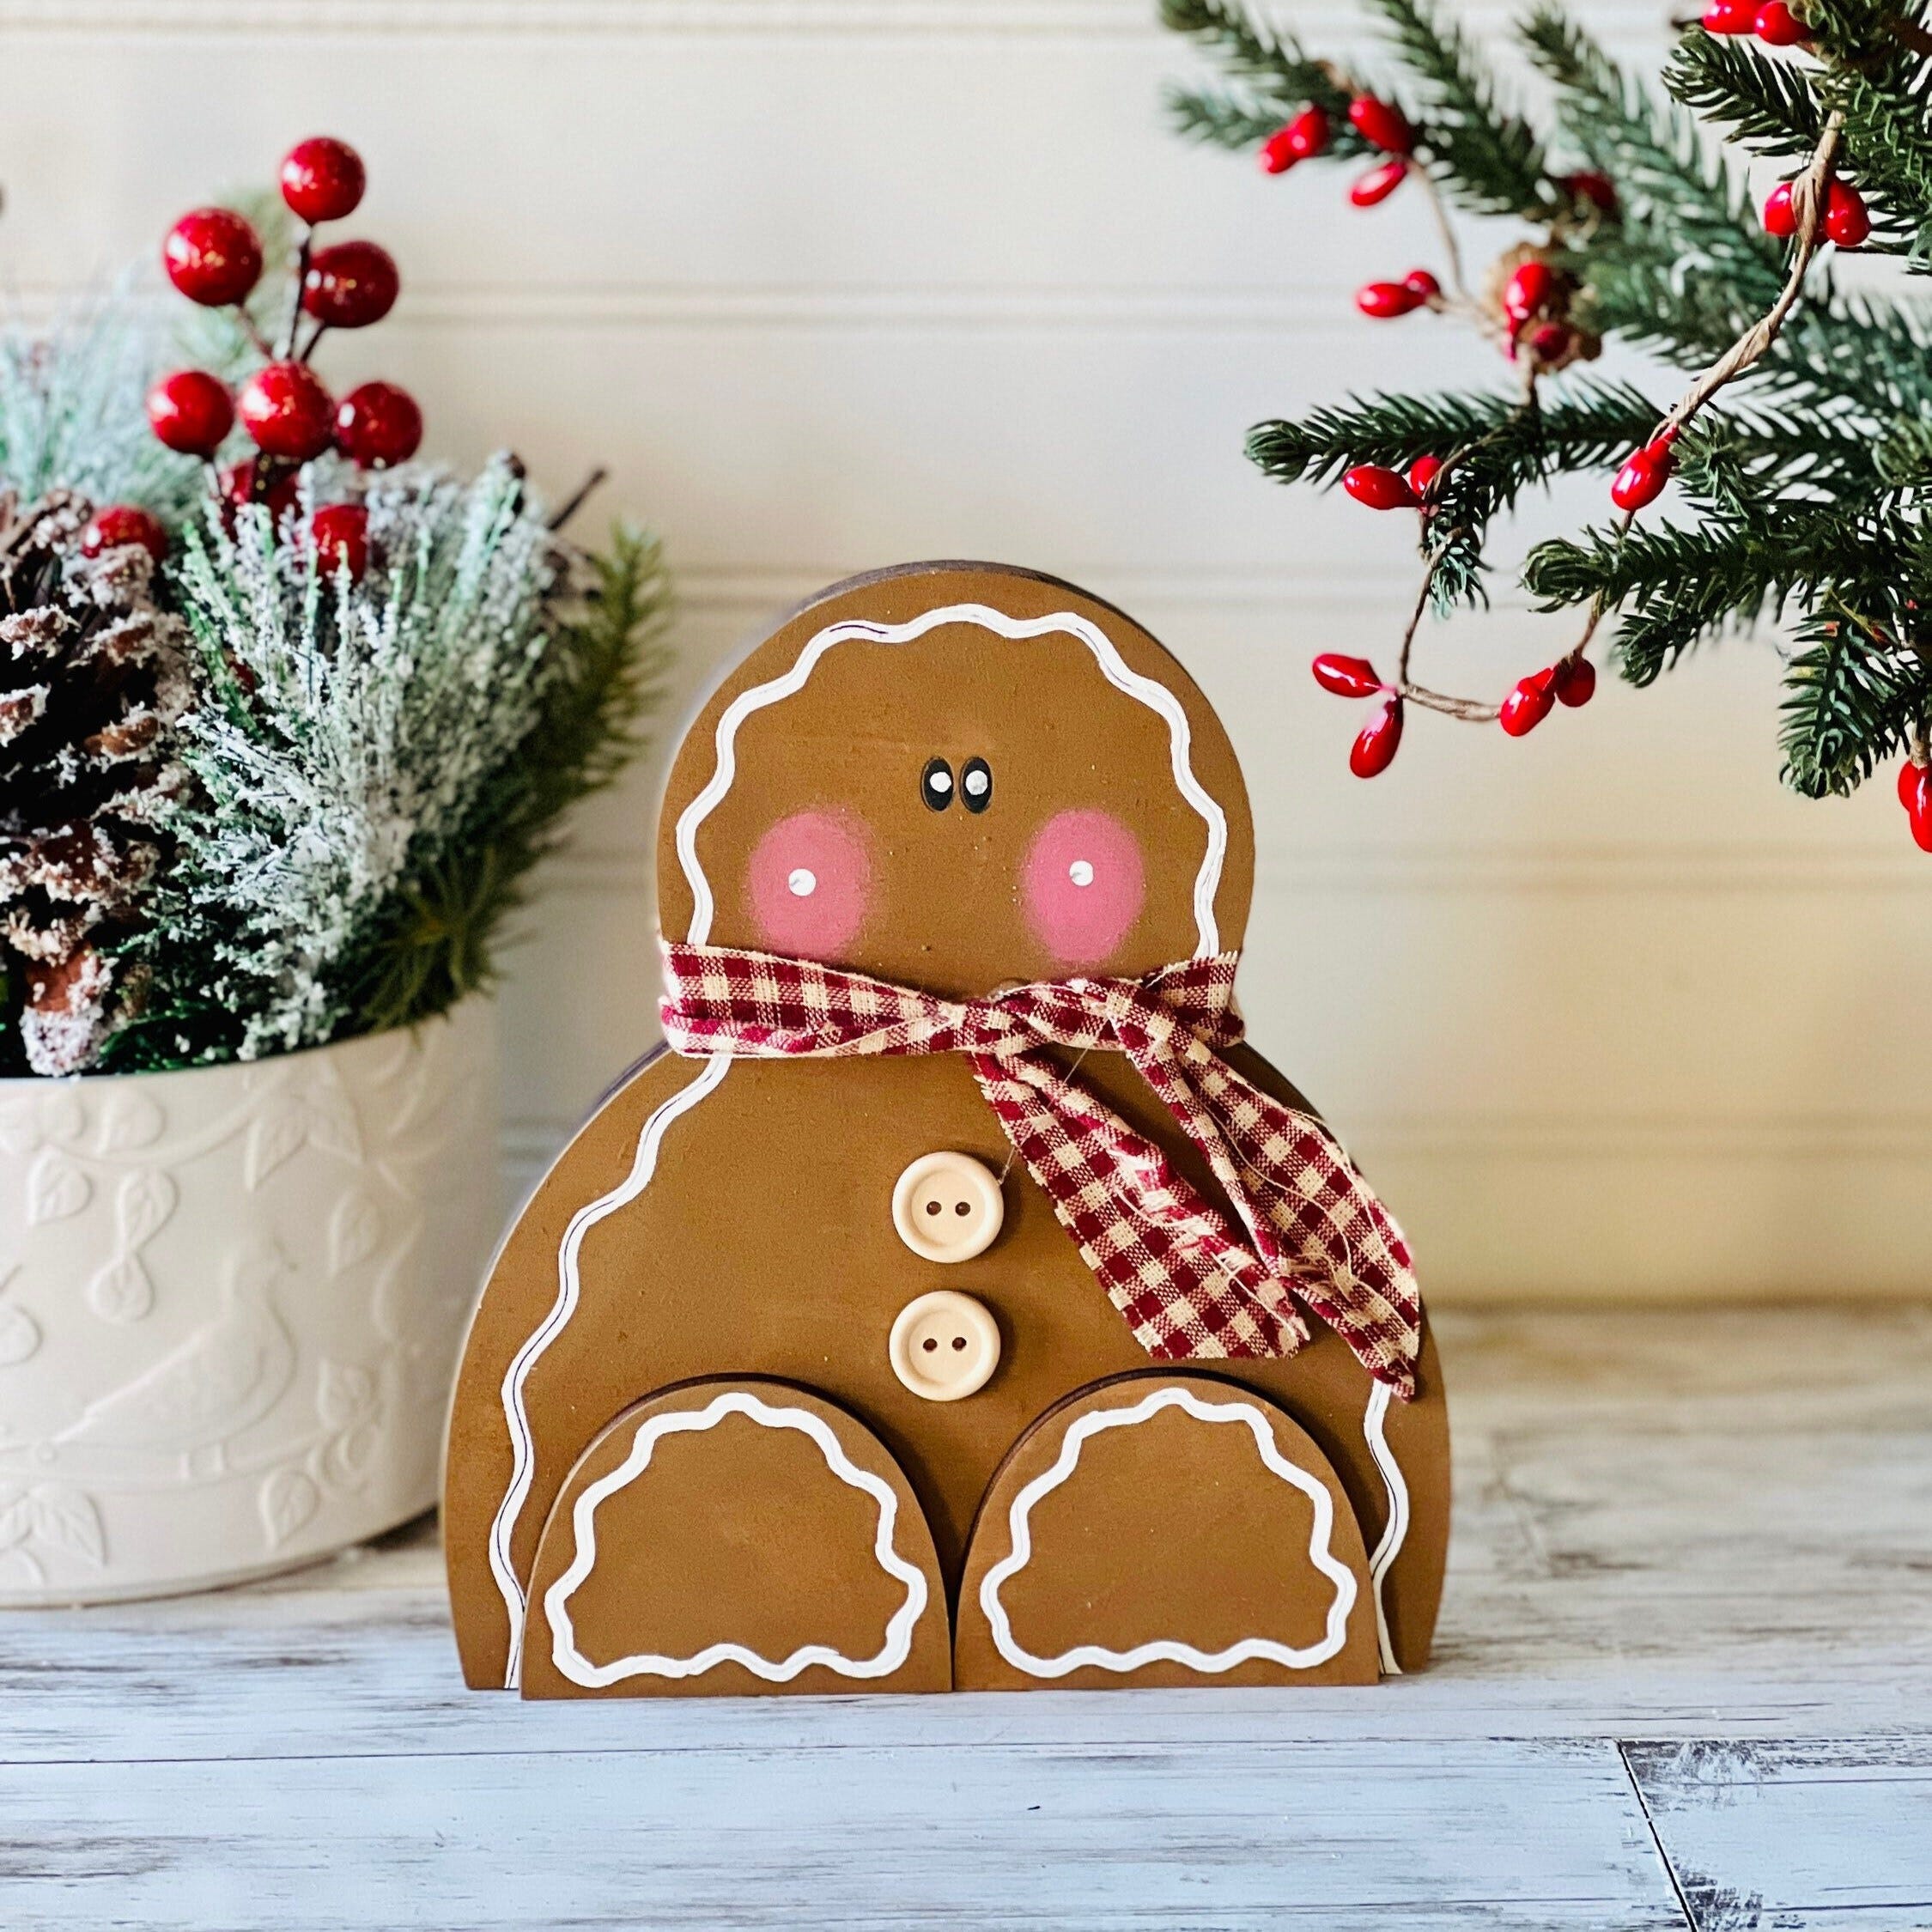 Gingerbreand Man SVG Digital Download for Glowforge or Laser Not a Physical Item